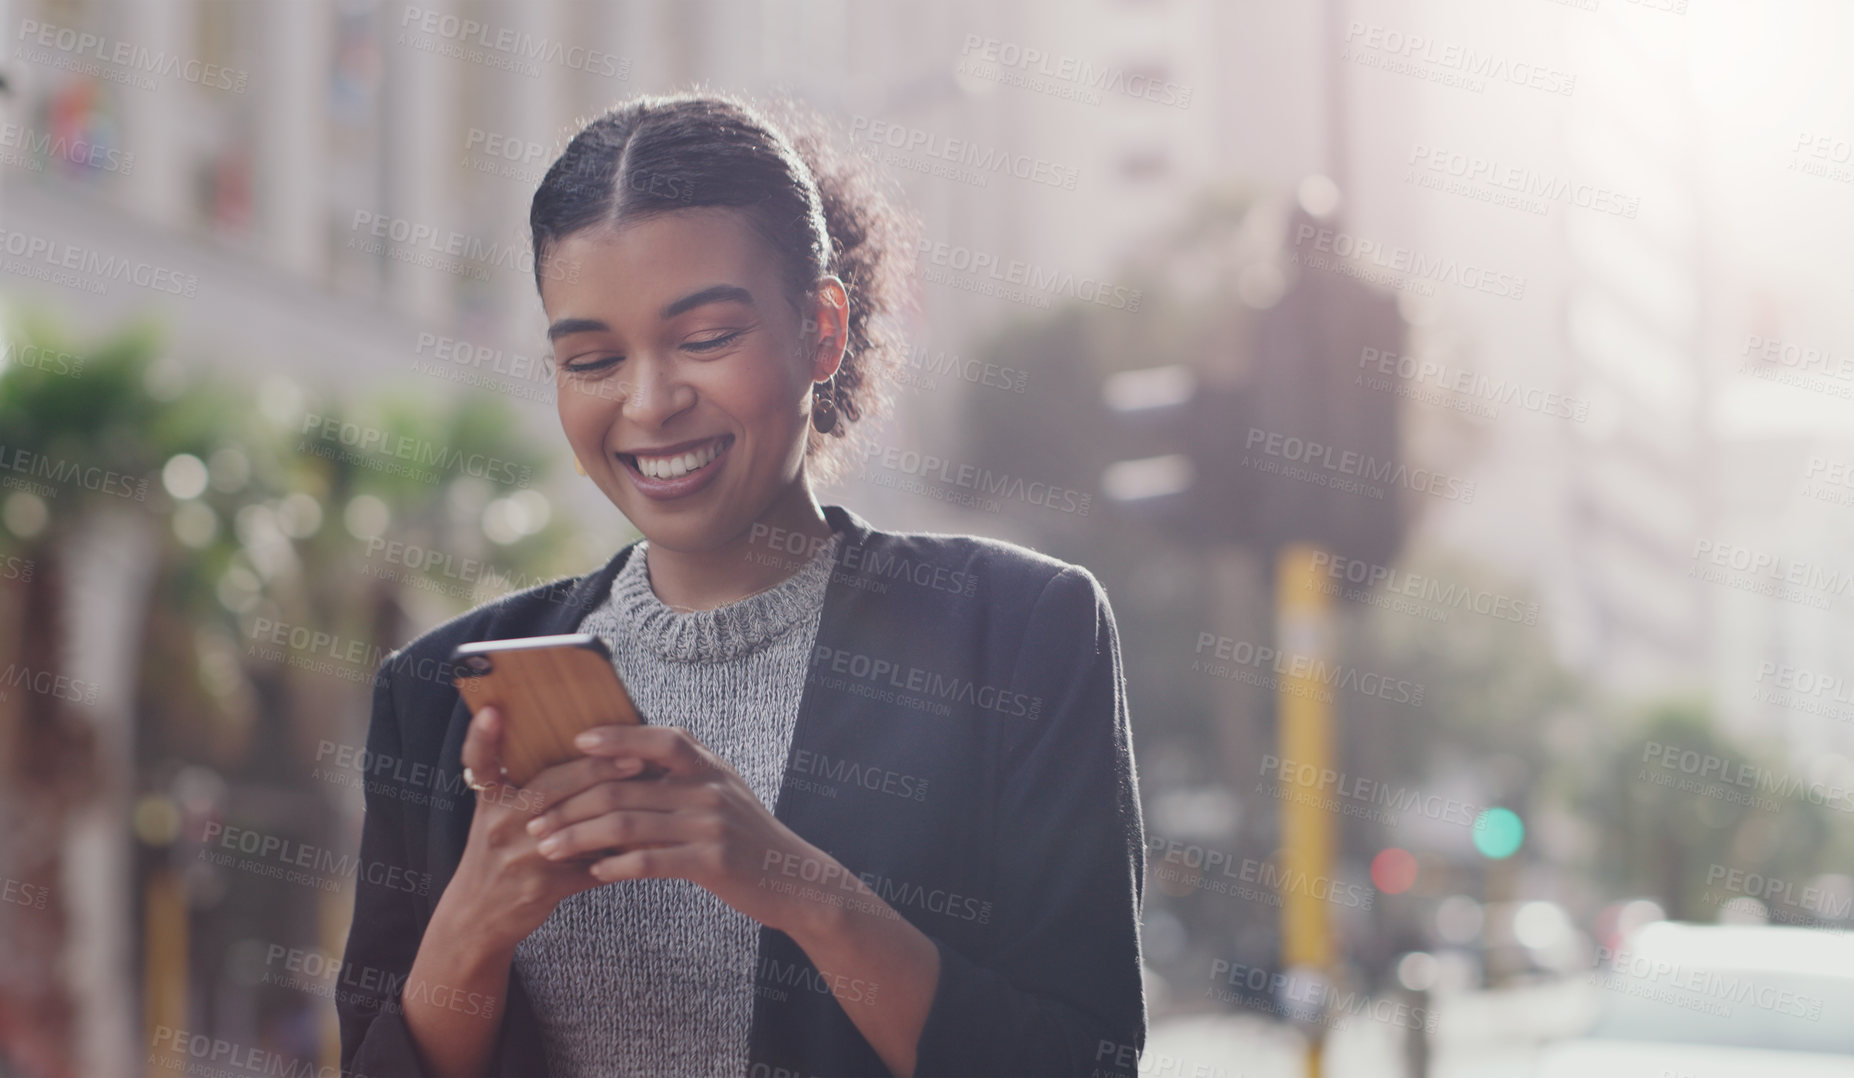 Buy stock photo Cropped shot of an attractive young businesswoman smiling while using a smartphone outdoors in the city